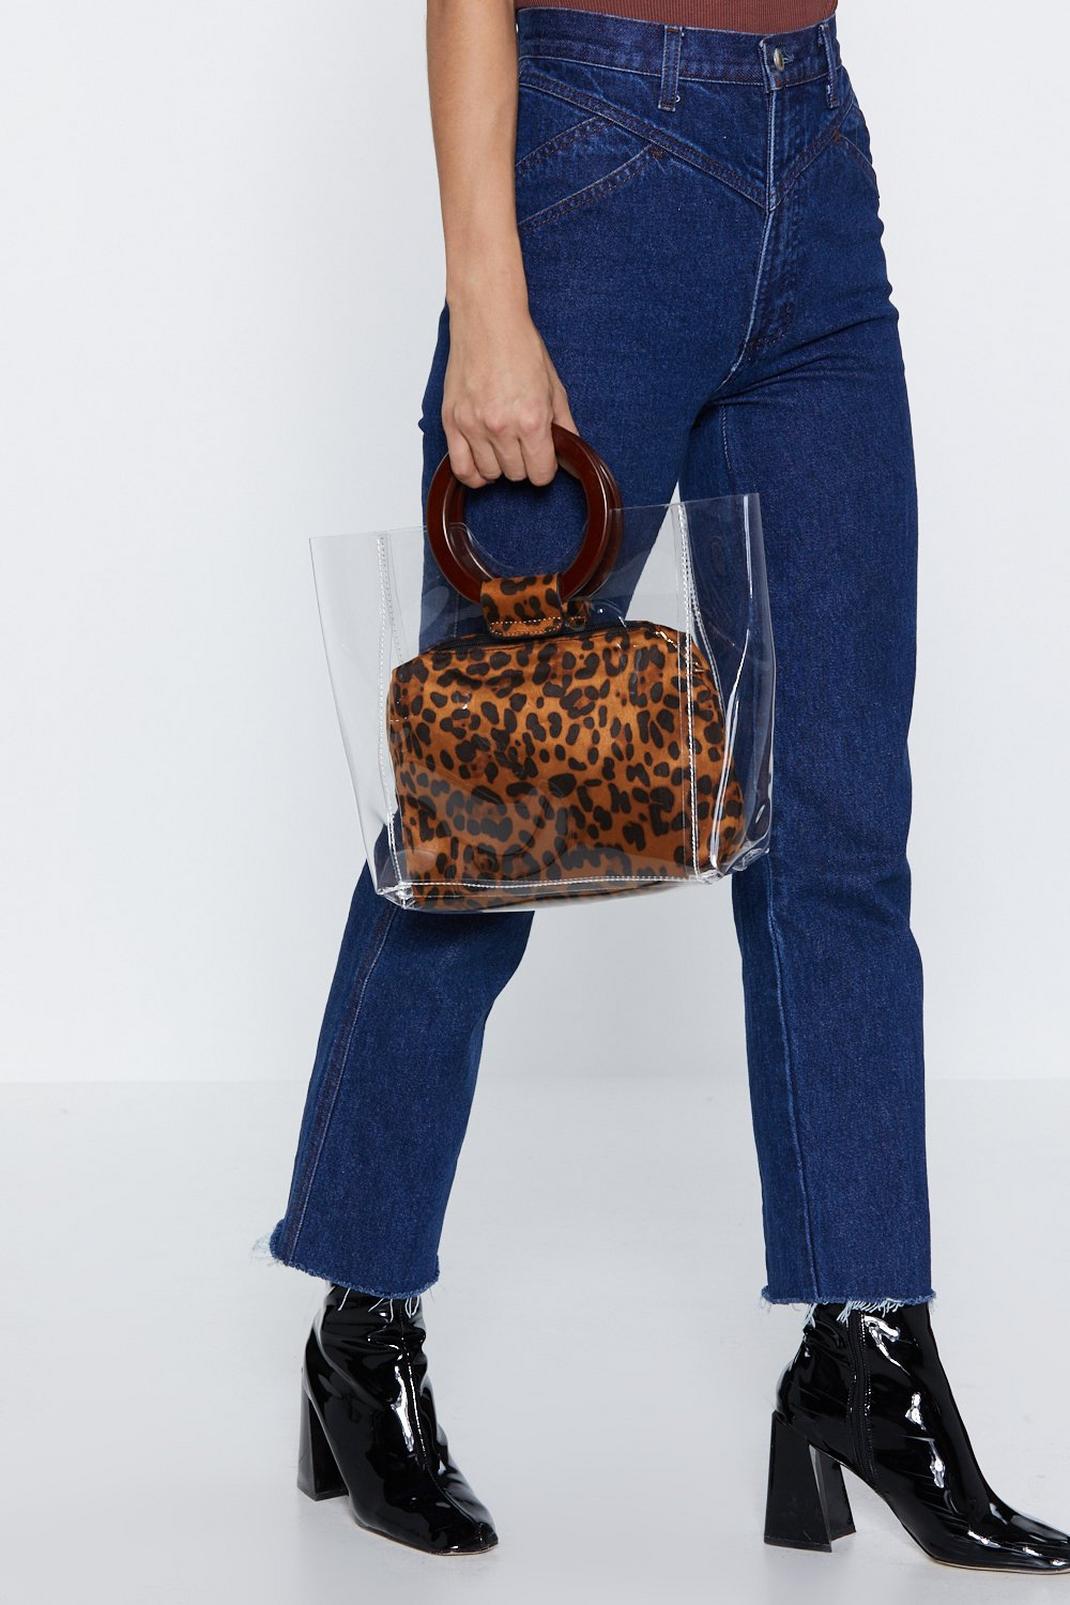 WANT Rattle Some Cages Leopard Tote Bag image number 1